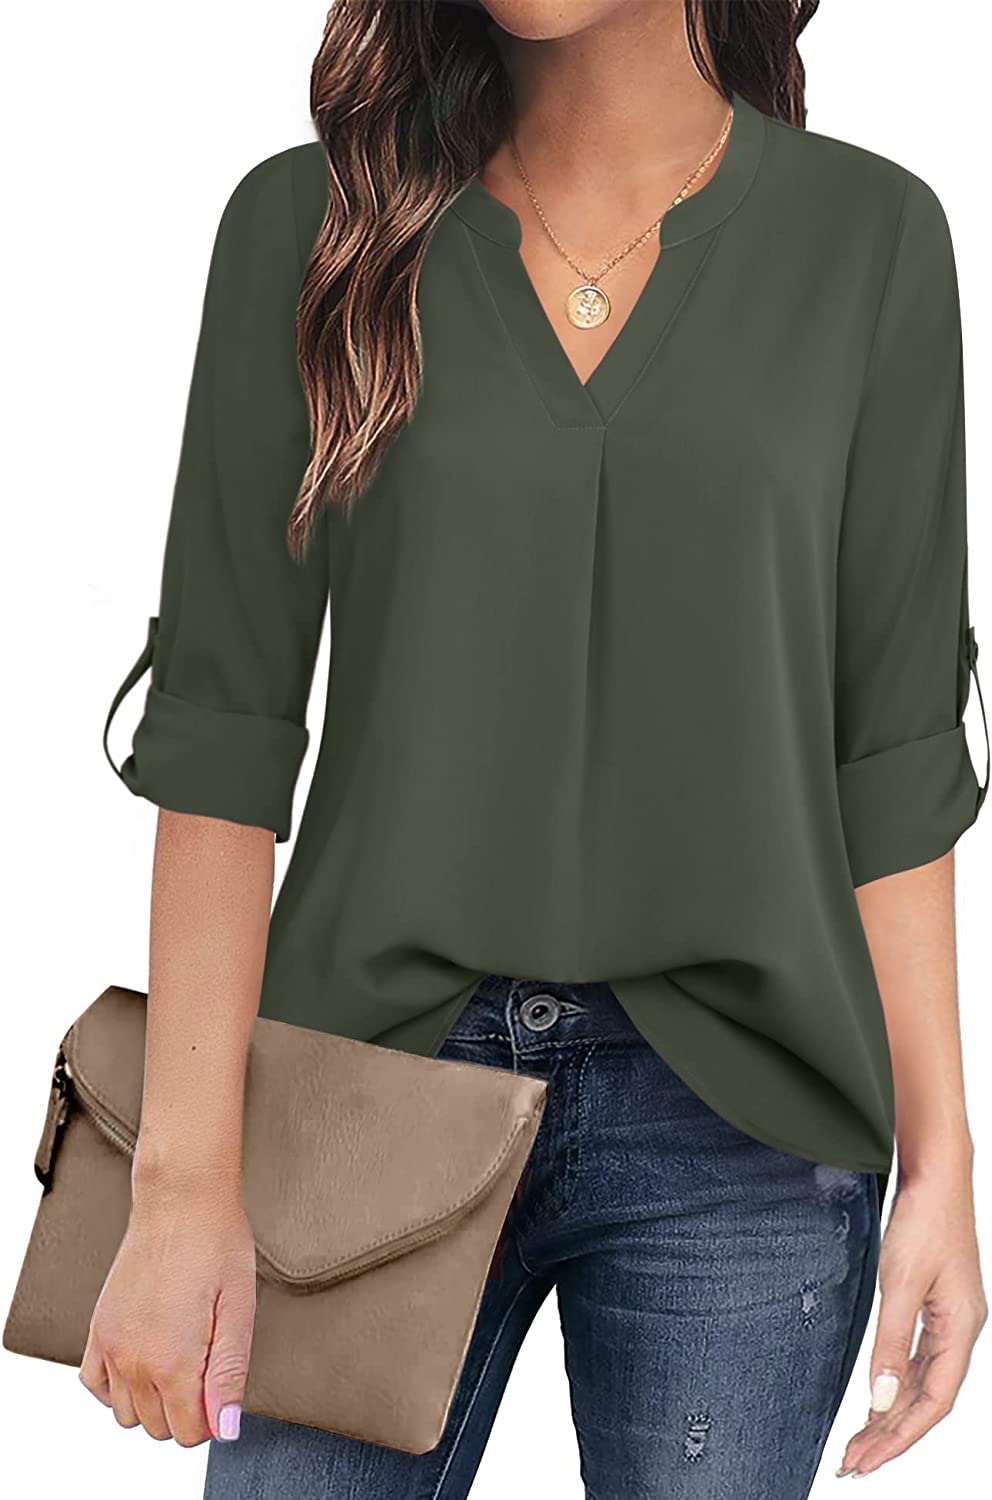 Timeson Blouses for Women,Tunic Tops to Wear with Leggings V Neck